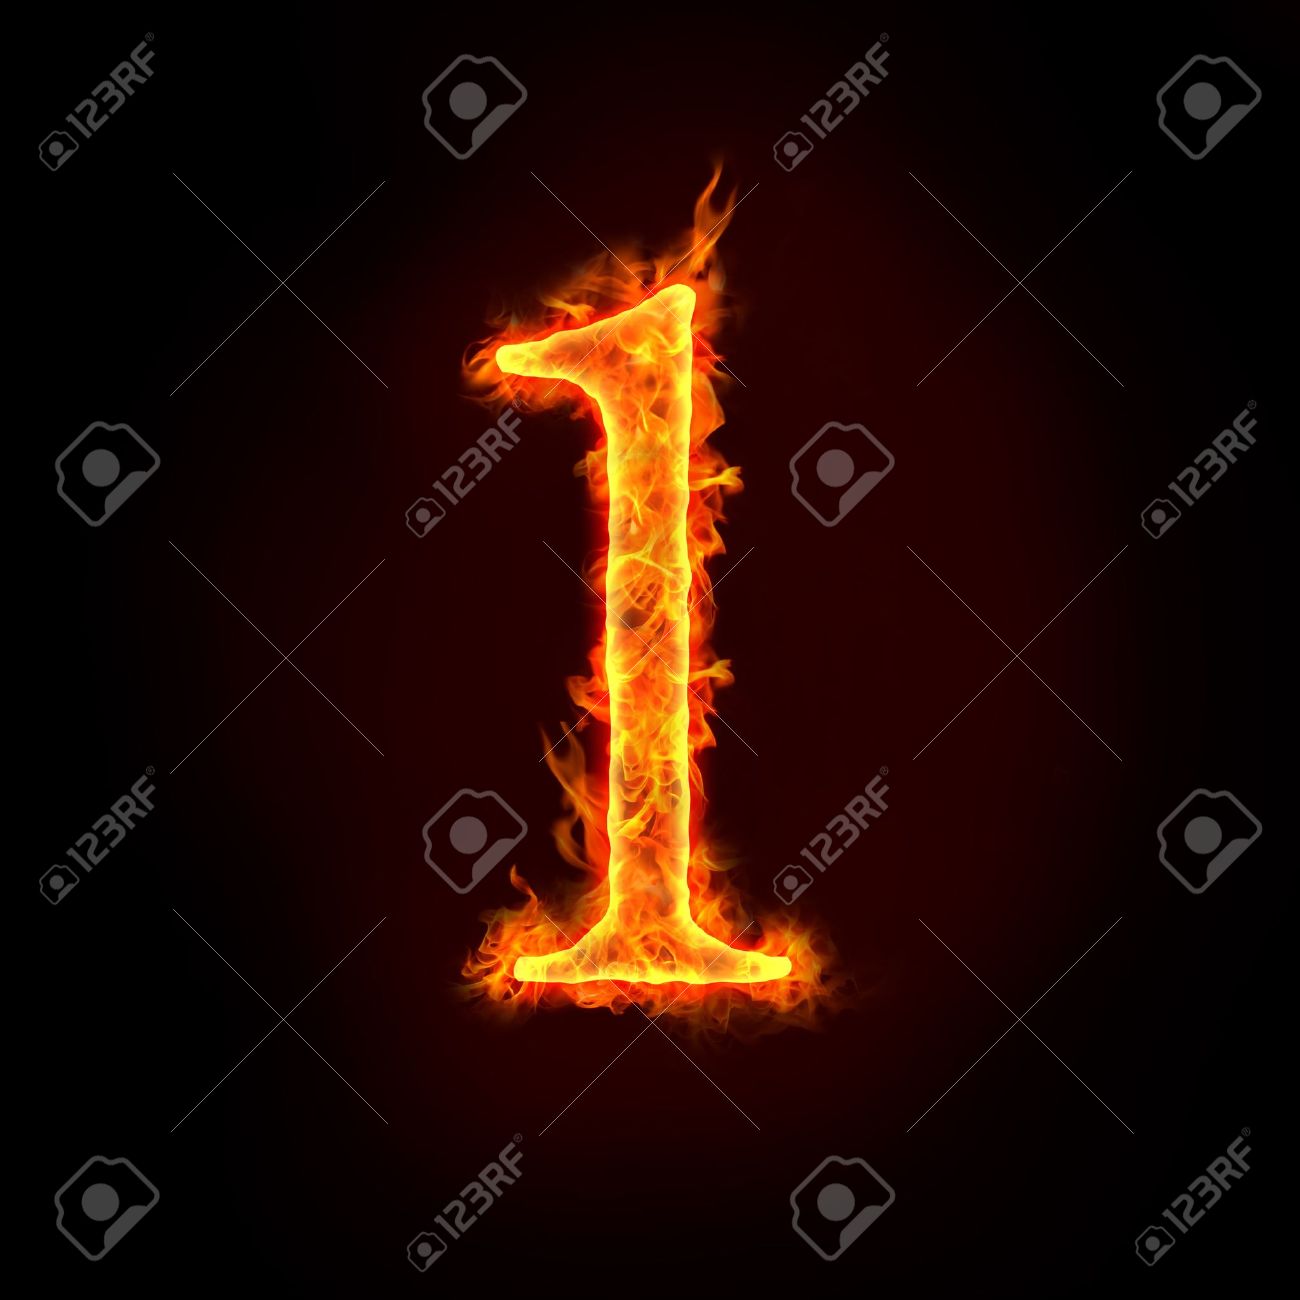 10285656-a-series-of-fire-numbers-in-flame-1-or-one-Stock-Photo-number.jpg